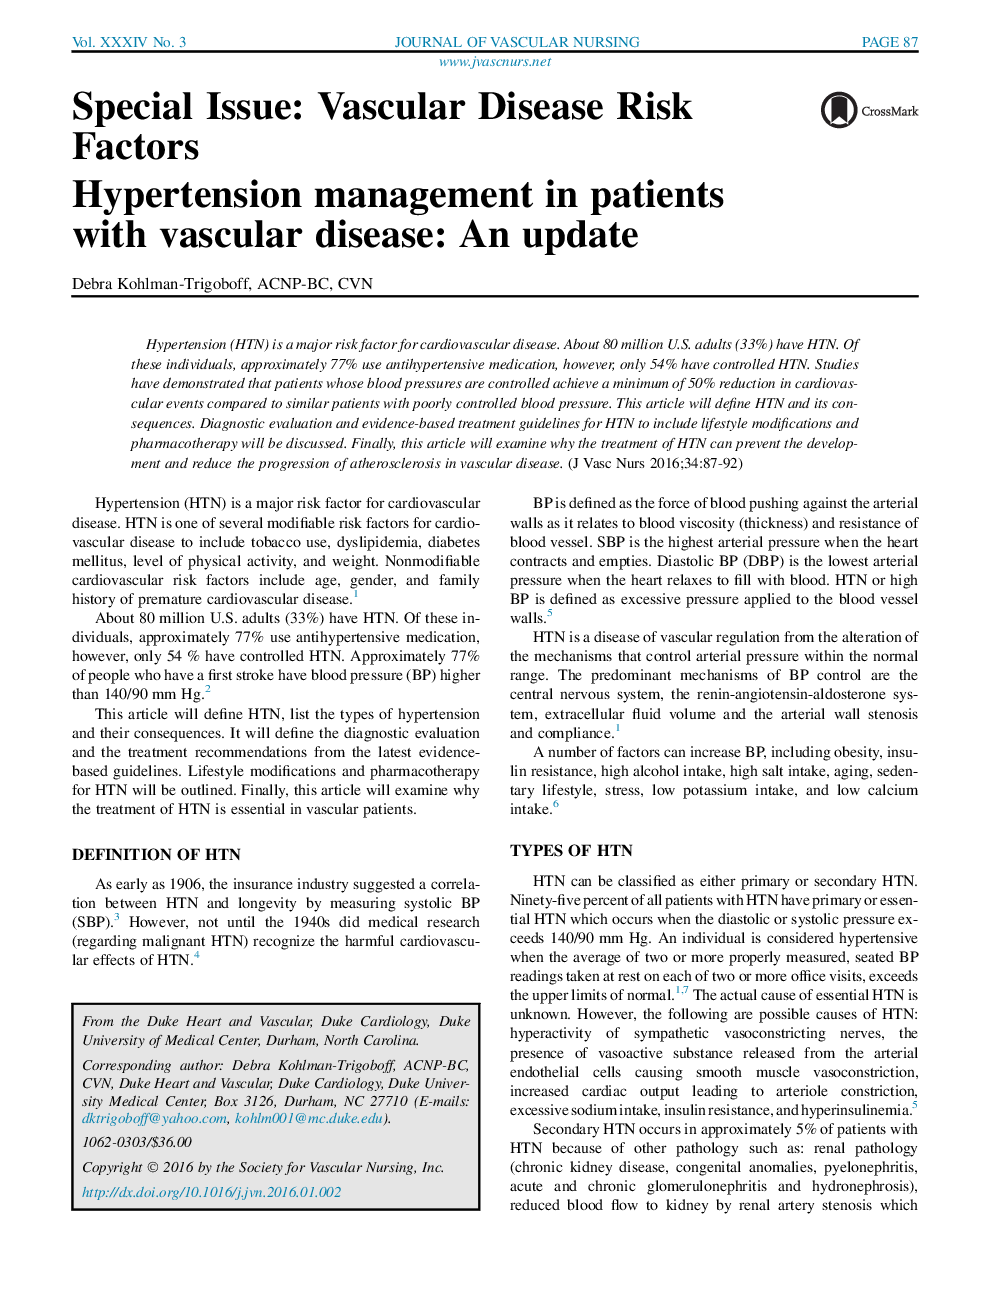 Hypertension management in patients with vascular disease: An update